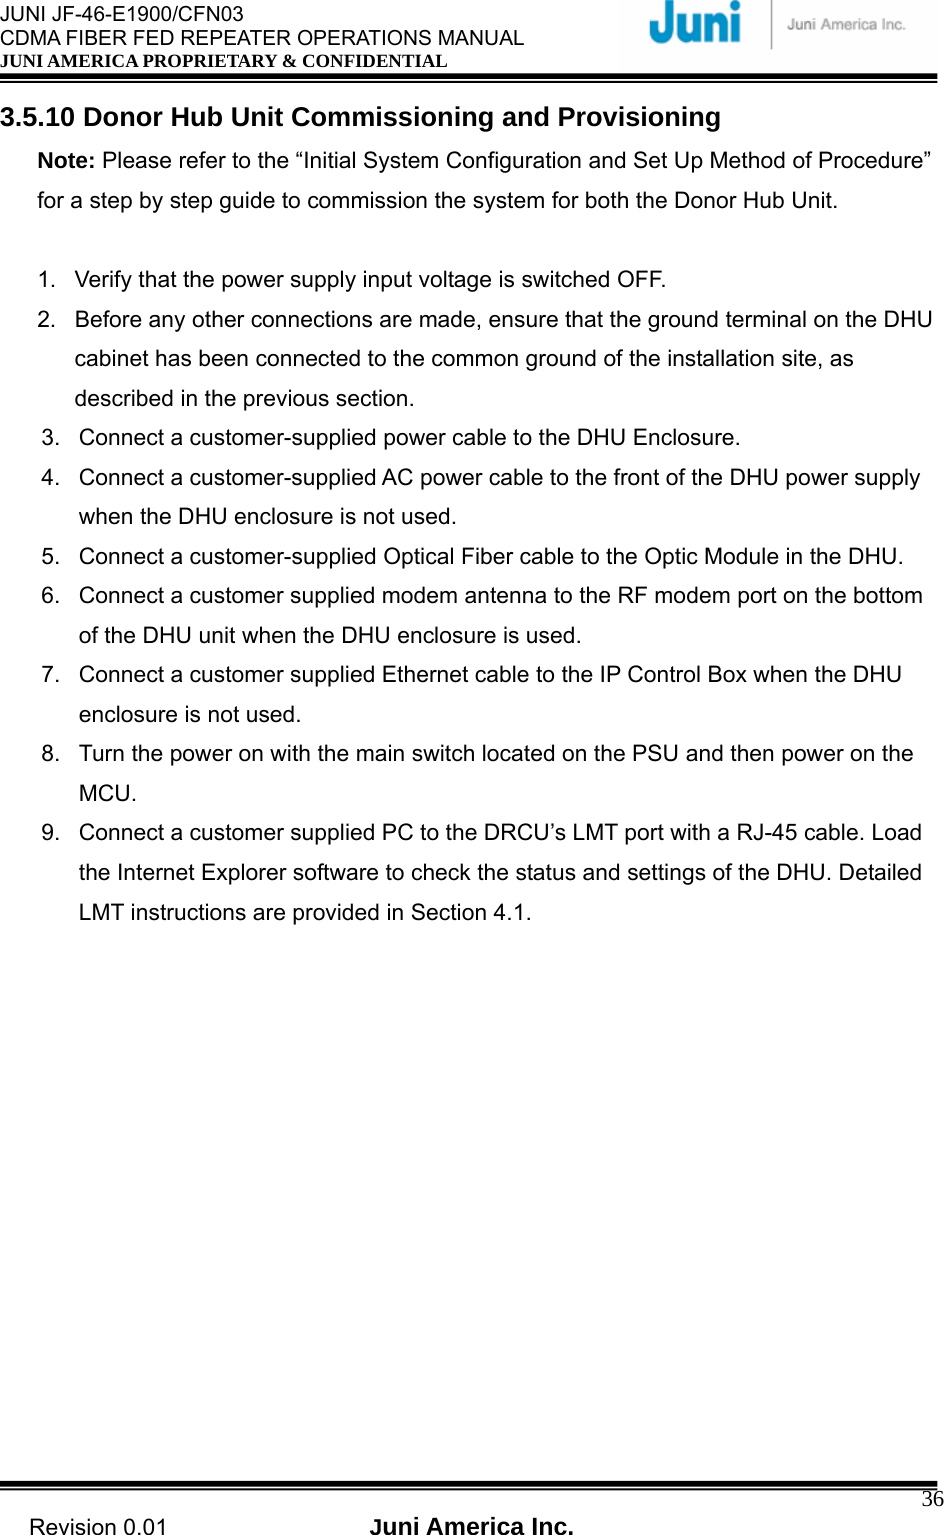  JUNI JF-46-E1900/CFN03 CDMA FIBER FED REPEATER OPERATIONS MANUAL JUNI AMERICA PROPRIETARY &amp; CONFIDENTIAL                                   Revision 0.01  Juni America Inc.  363.5.10 Donor Hub Unit Commissioning and Provisioning Note: Please refer to the “Initial System Configuration and Set Up Method of Procedure” for a step by step guide to commission the system for both the Donor Hub Unit.  1.  Verify that the power supply input voltage is switched OFF. 2.  Before any other connections are made, ensure that the ground terminal on the DHU cabinet has been connected to the common ground of the installation site, as described in the previous section. 3.  Connect a customer-supplied power cable to the DHU Enclosure. 4.  Connect a customer-supplied AC power cable to the front of the DHU power supply when the DHU enclosure is not used. 5.  Connect a customer-supplied Optical Fiber cable to the Optic Module in the DHU. 6.  Connect a customer supplied modem antenna to the RF modem port on the bottom of the DHU unit when the DHU enclosure is used. 7.  Connect a customer supplied Ethernet cable to the IP Control Box when the DHU enclosure is not used. 8.  Turn the power on with the main switch located on the PSU and then power on the MCU. 9.  Connect a customer supplied PC to the DRCU’s LMT port with a RJ-45 cable. Load the Internet Explorer software to check the status and settings of the DHU. Detailed LMT instructions are provided in Section 4.1. 